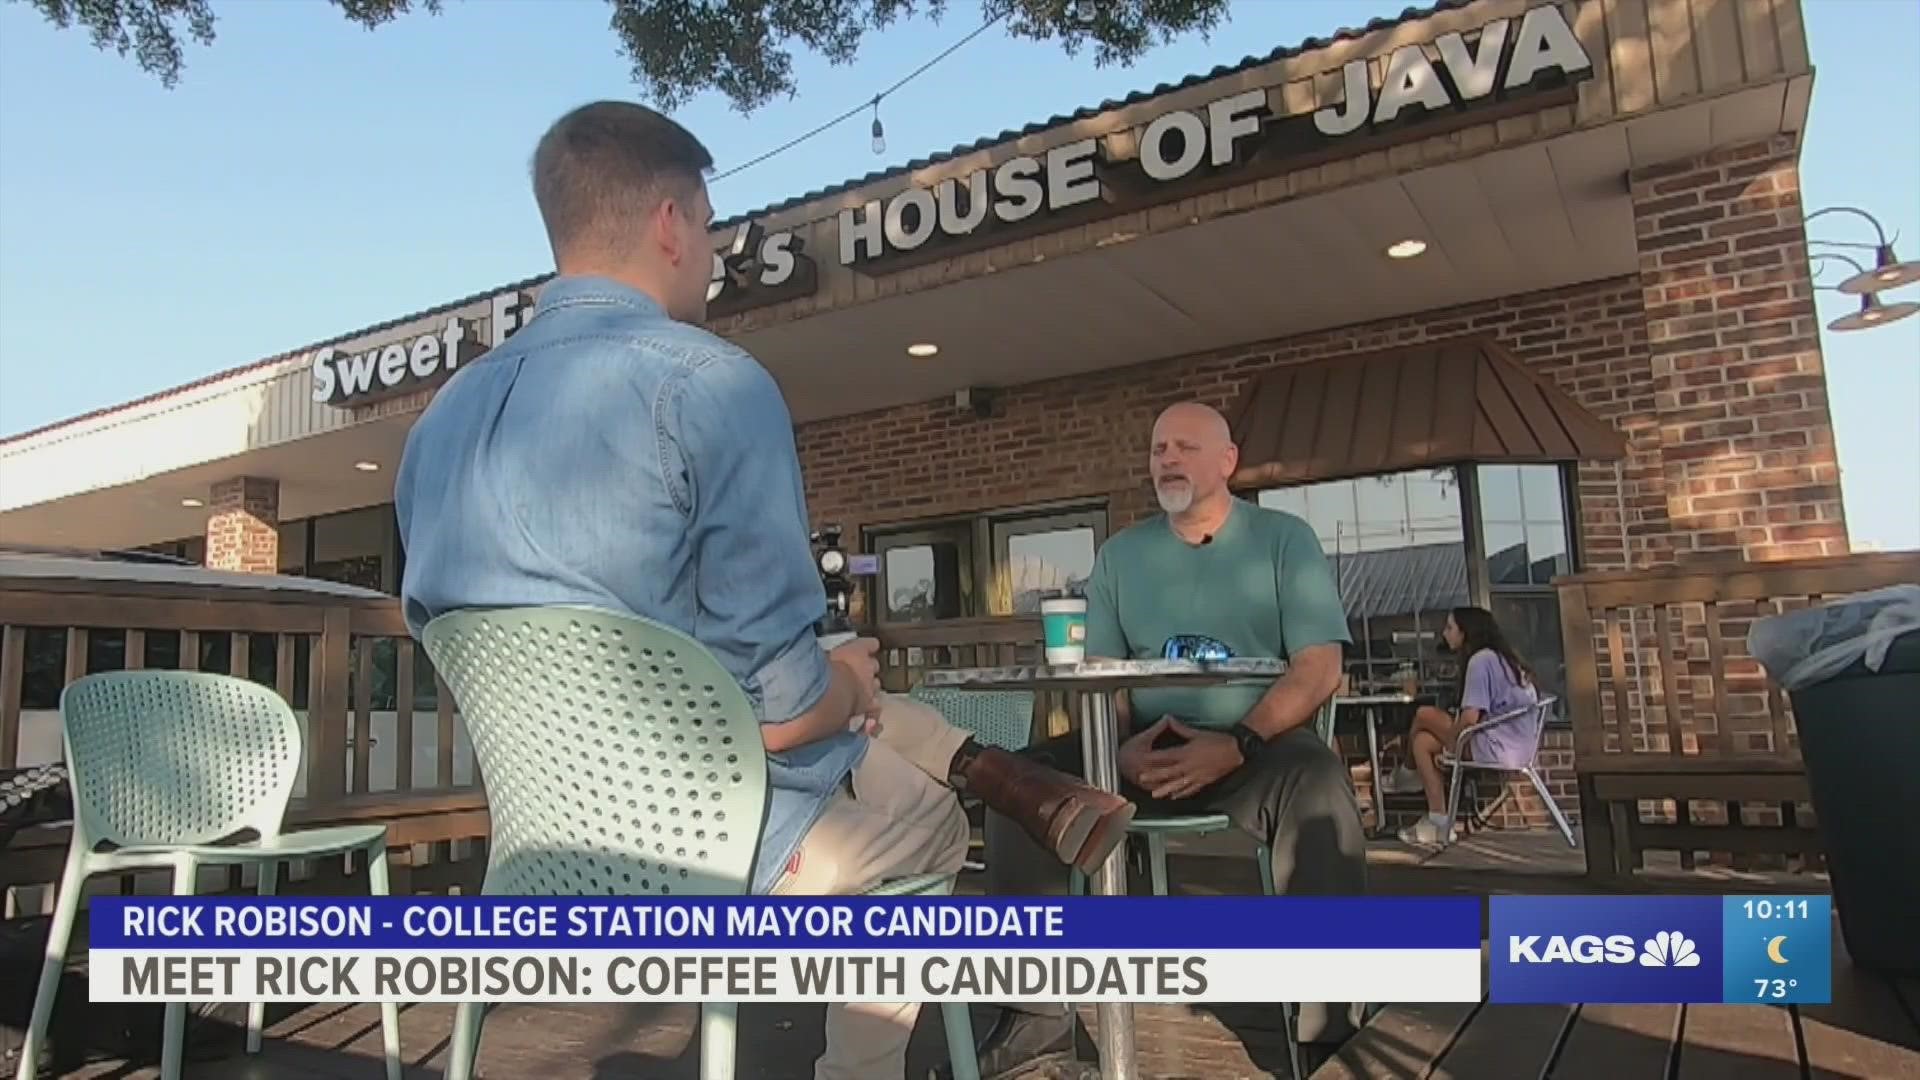 Rick Robison is a United States Army veteran who wants to make lowering taxes a priority, should he be elected Mayor of College Station.